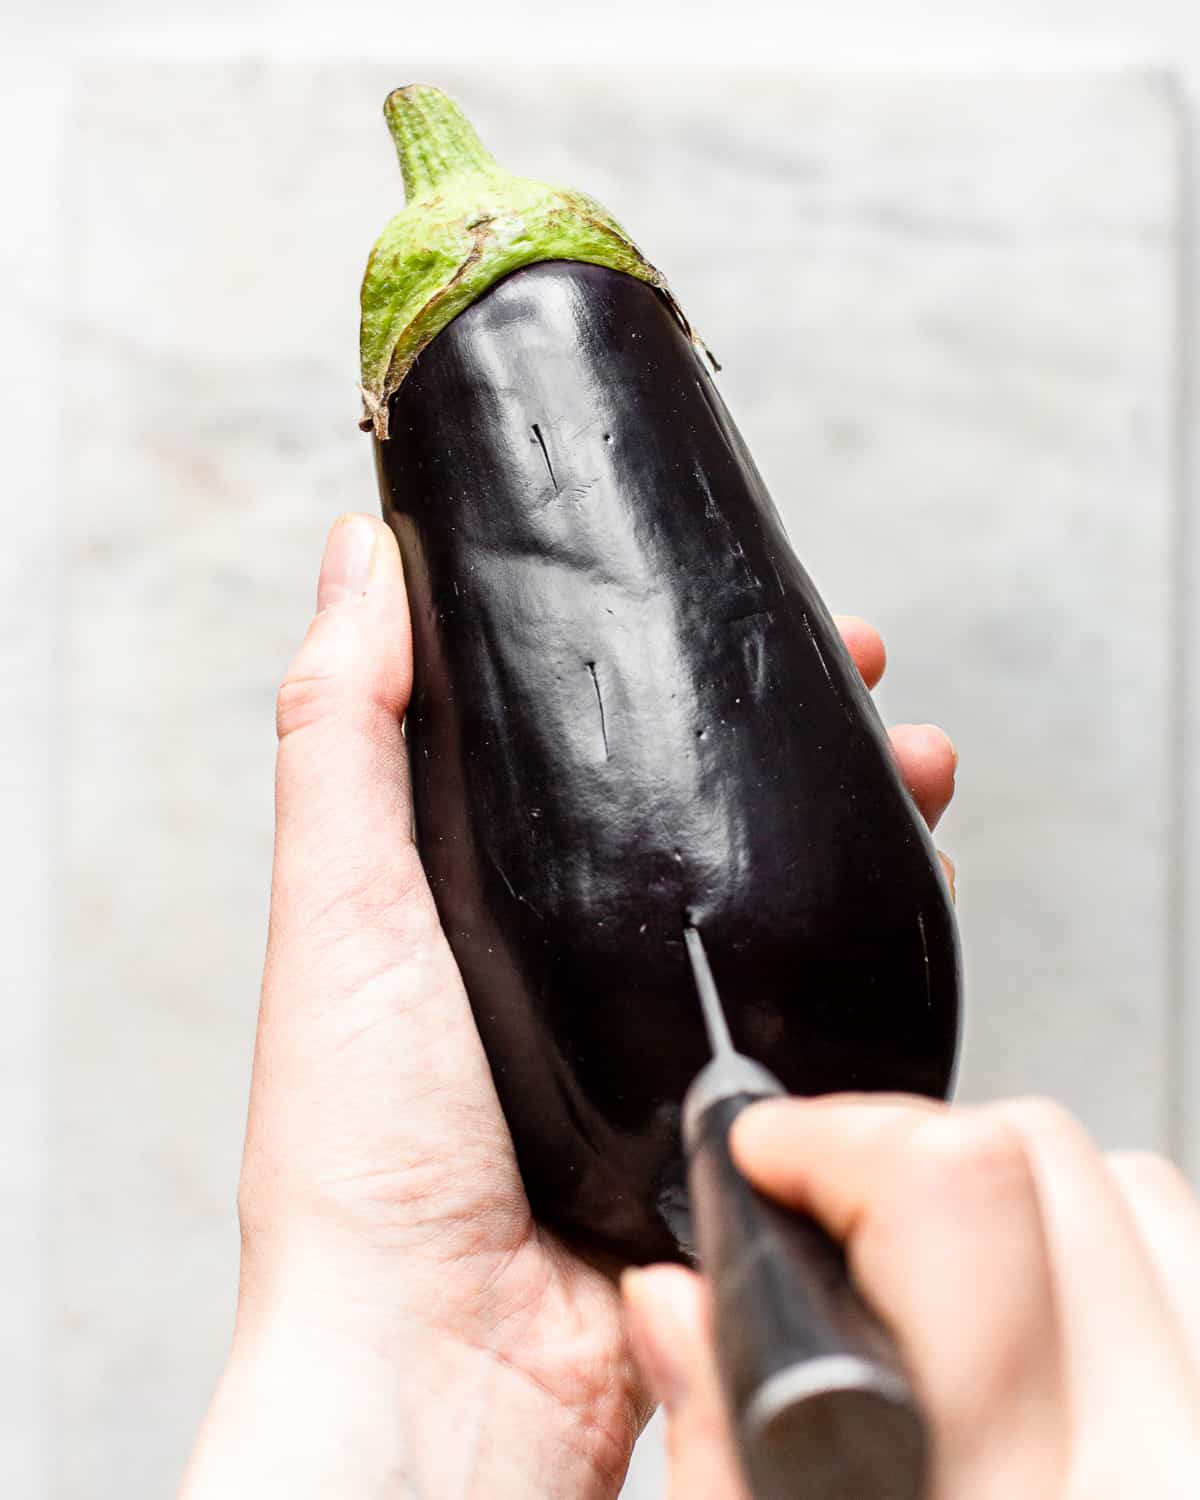 Hand poking holes into an eggplant with a small knife.